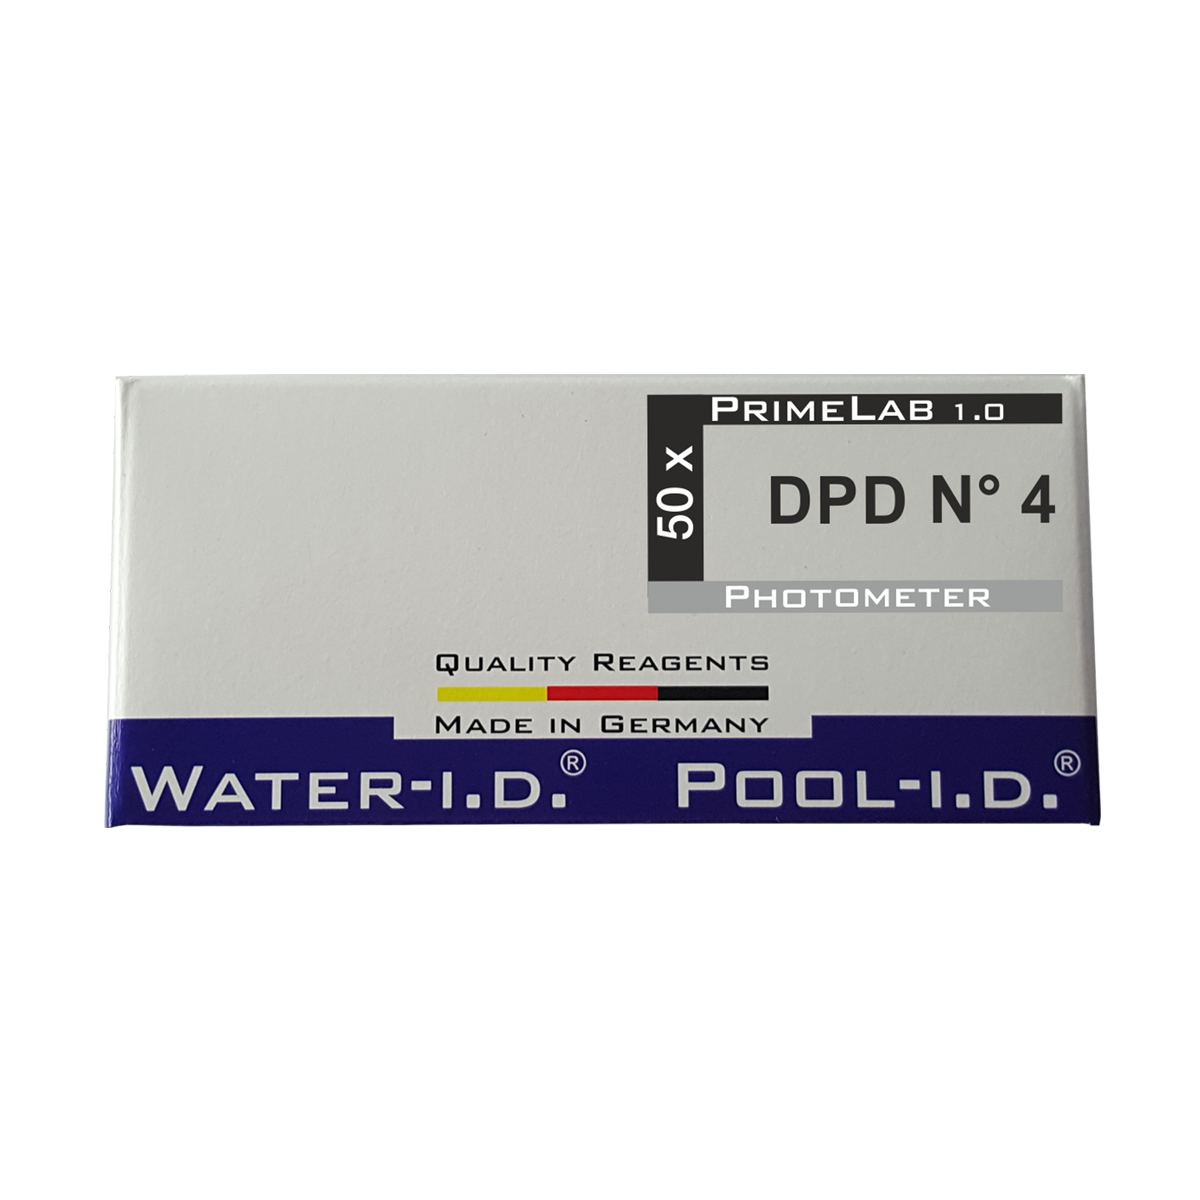 DPD 4 active Oxygen Tablets for Smart Pool Lab 1.0 Photometer, unit = 50 pcs. DPD 4 active Oxygen Tablets for Smart Pool Lab 1.0 Photometer, unit = 50 pcs.